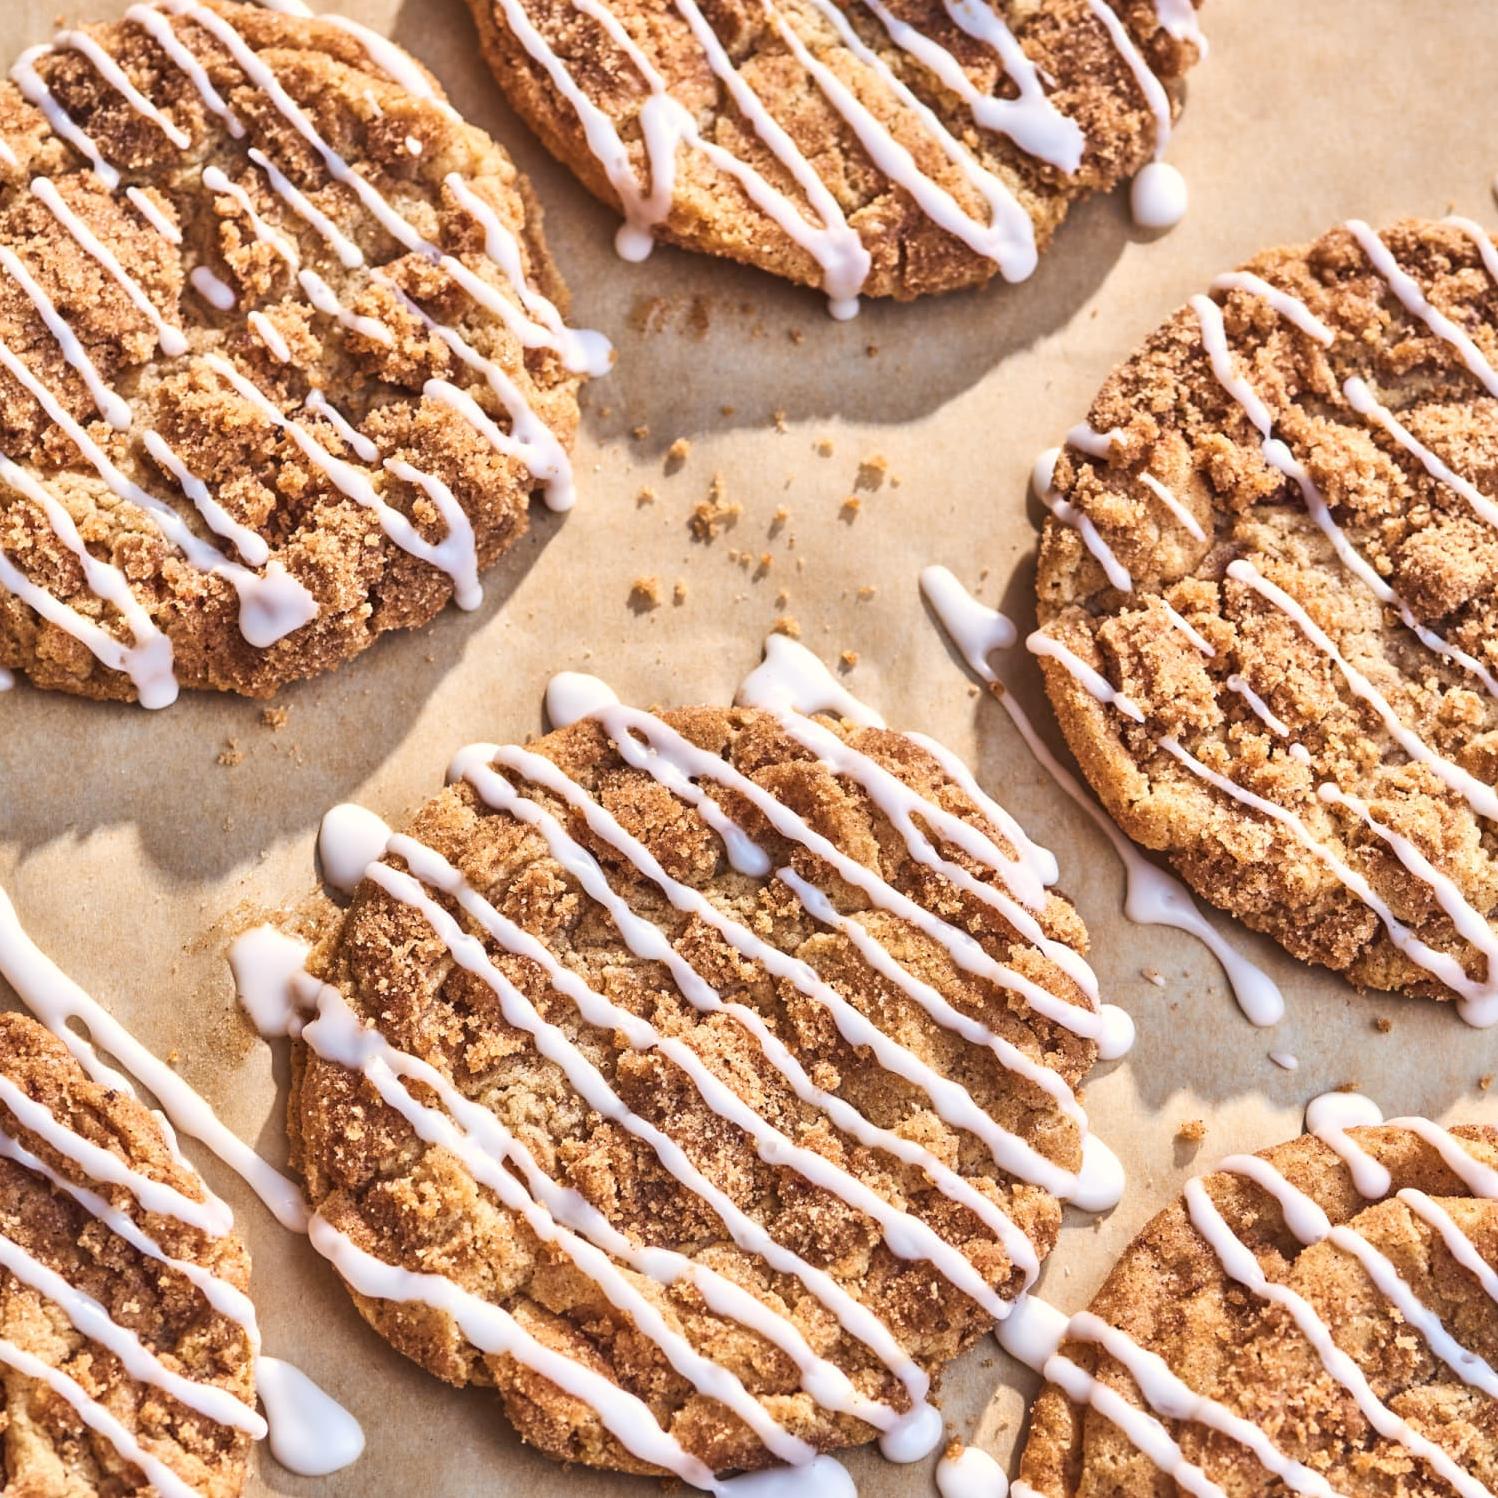 Indulge in Delicious Coffee Cake Cookies Today!